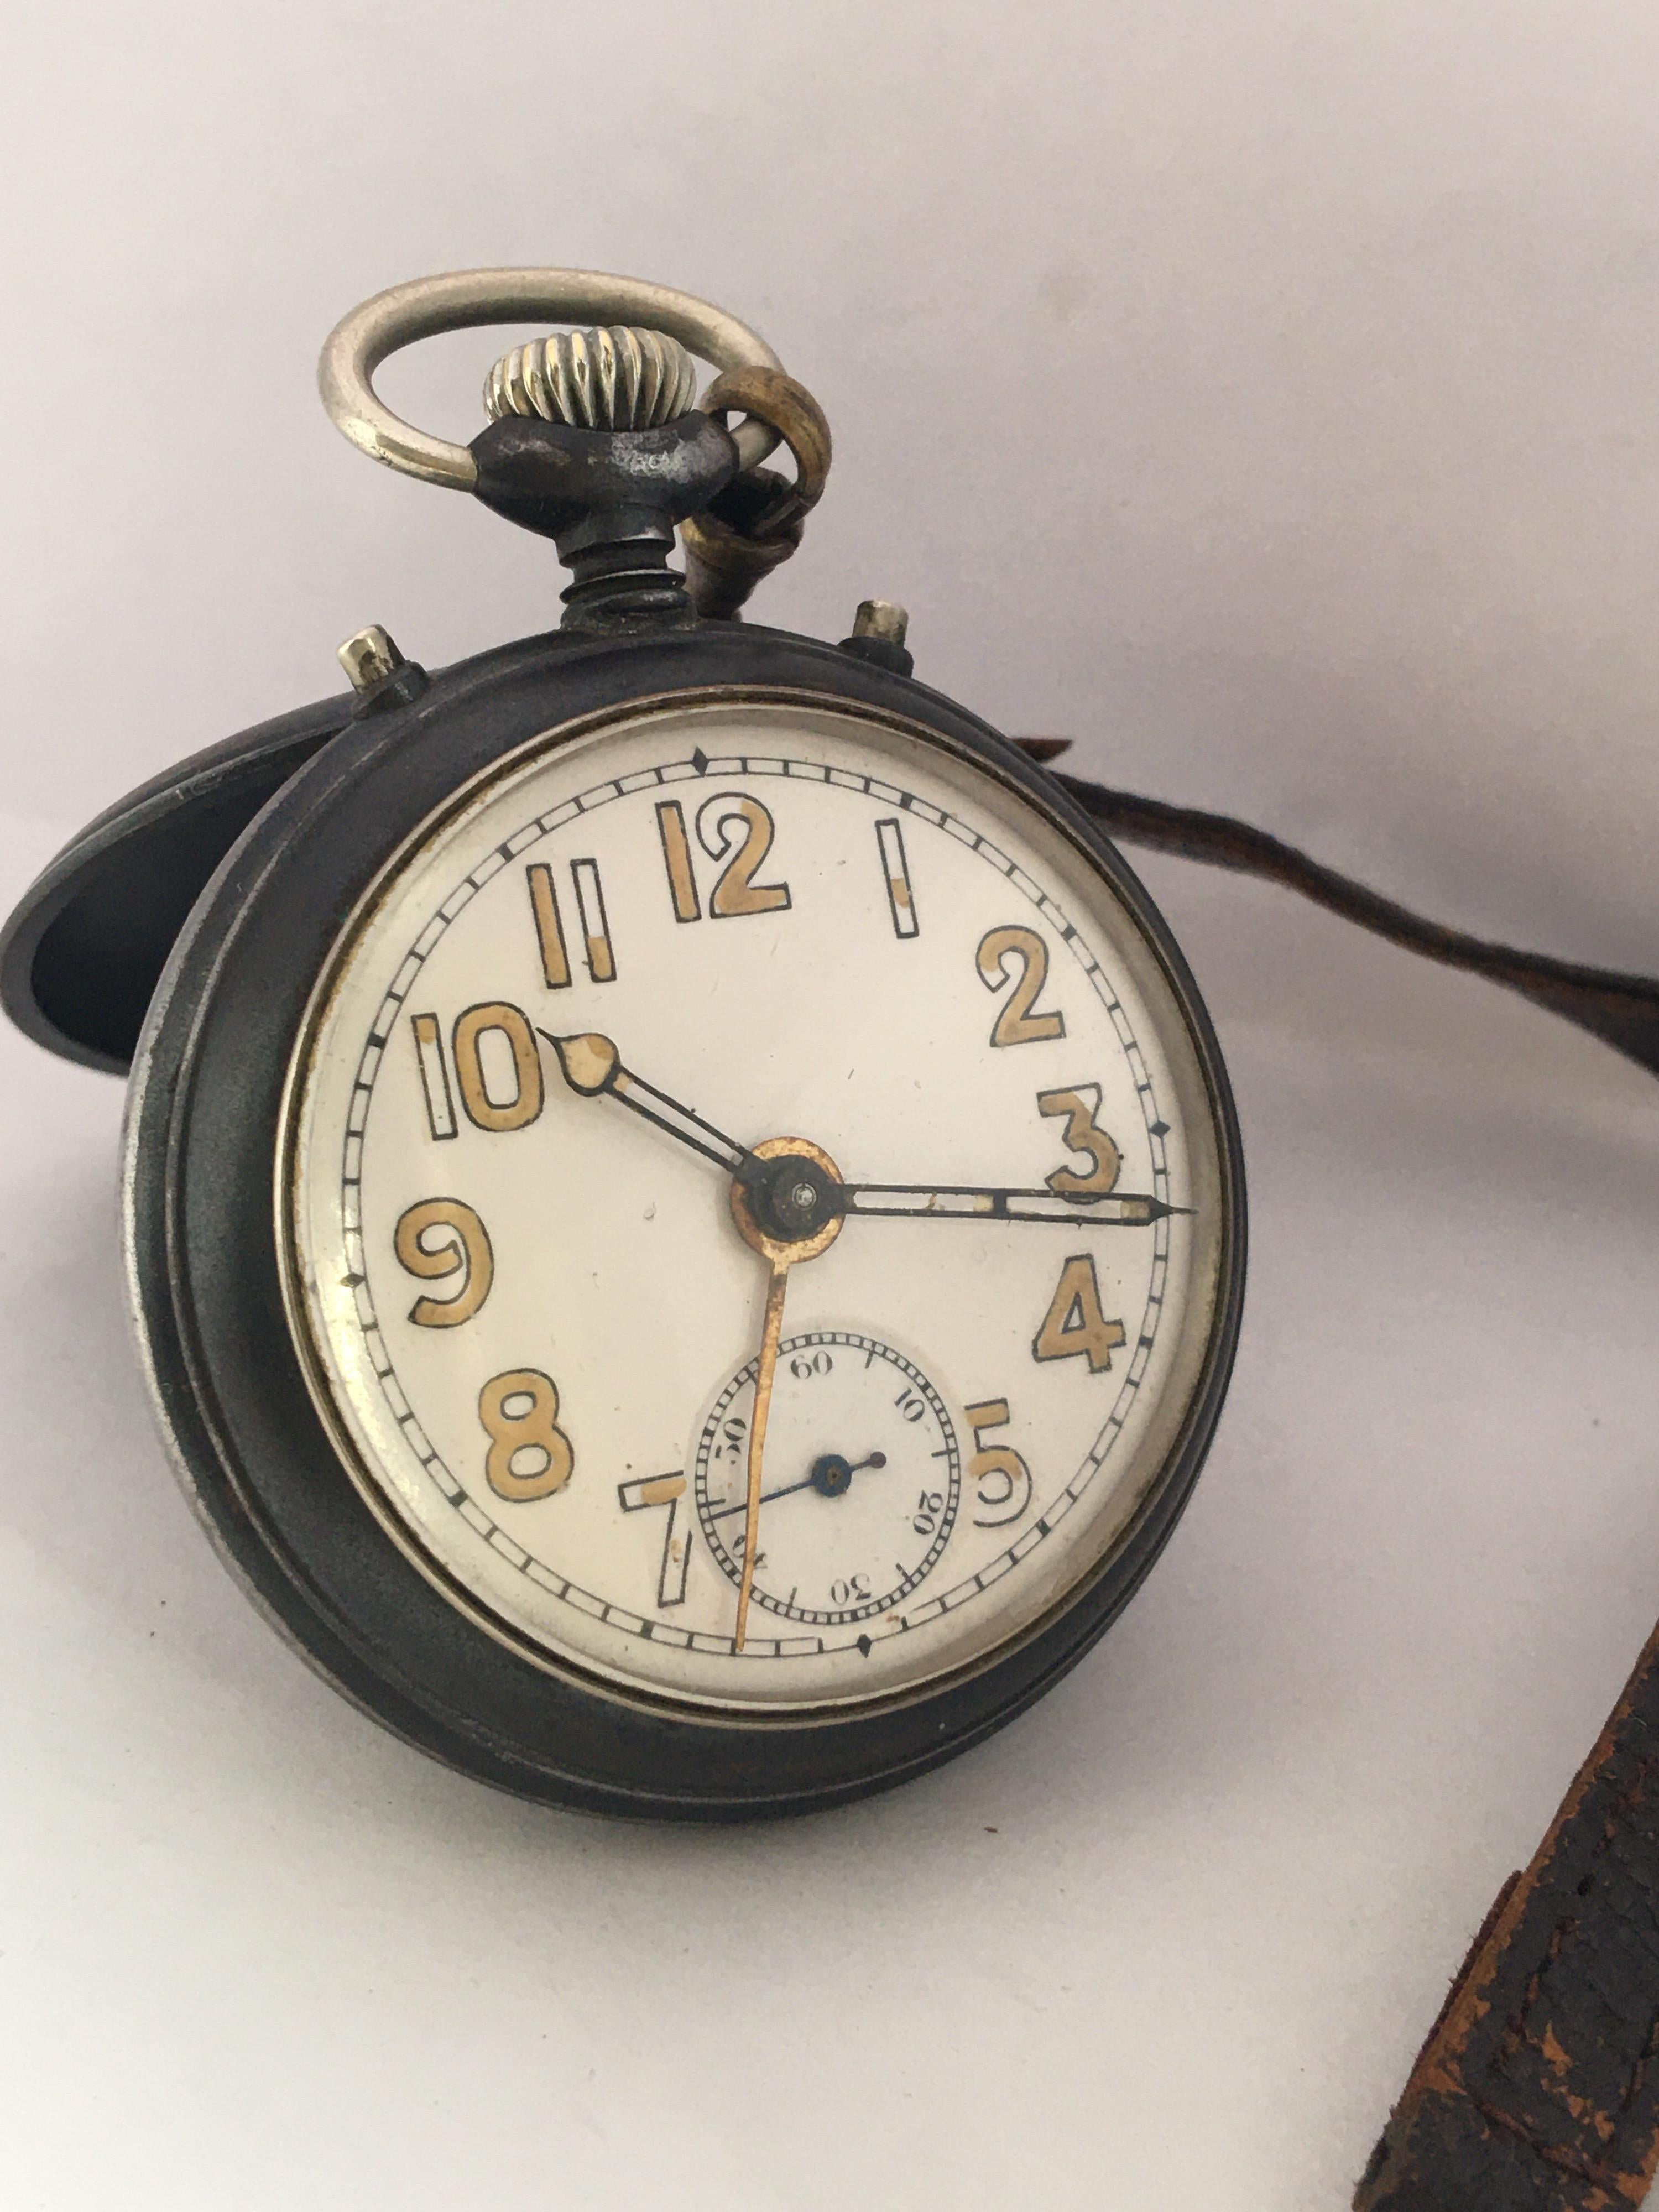 This beautiful pre-owned antique hand winding travel alarm clock / pocket watch is in good working condition and it is running well. Visible signs of ageing and wear with light scratches and tarnishes on the 53mm diameter ( excluding crown) watch